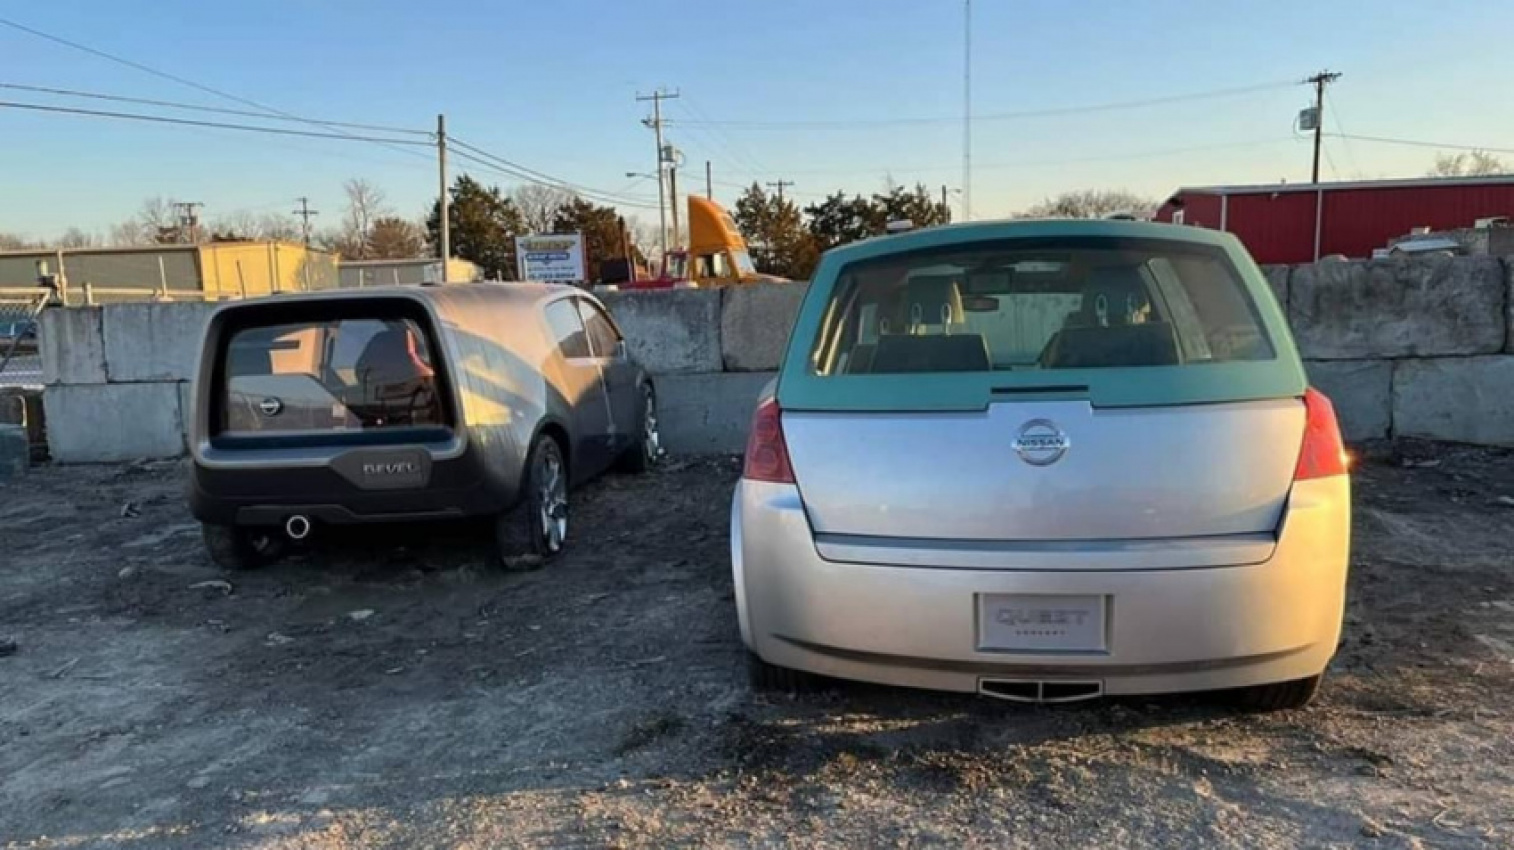 autos, cars, nissan, nissan cars of tomorrow crushed today in tennessee wrecking yard